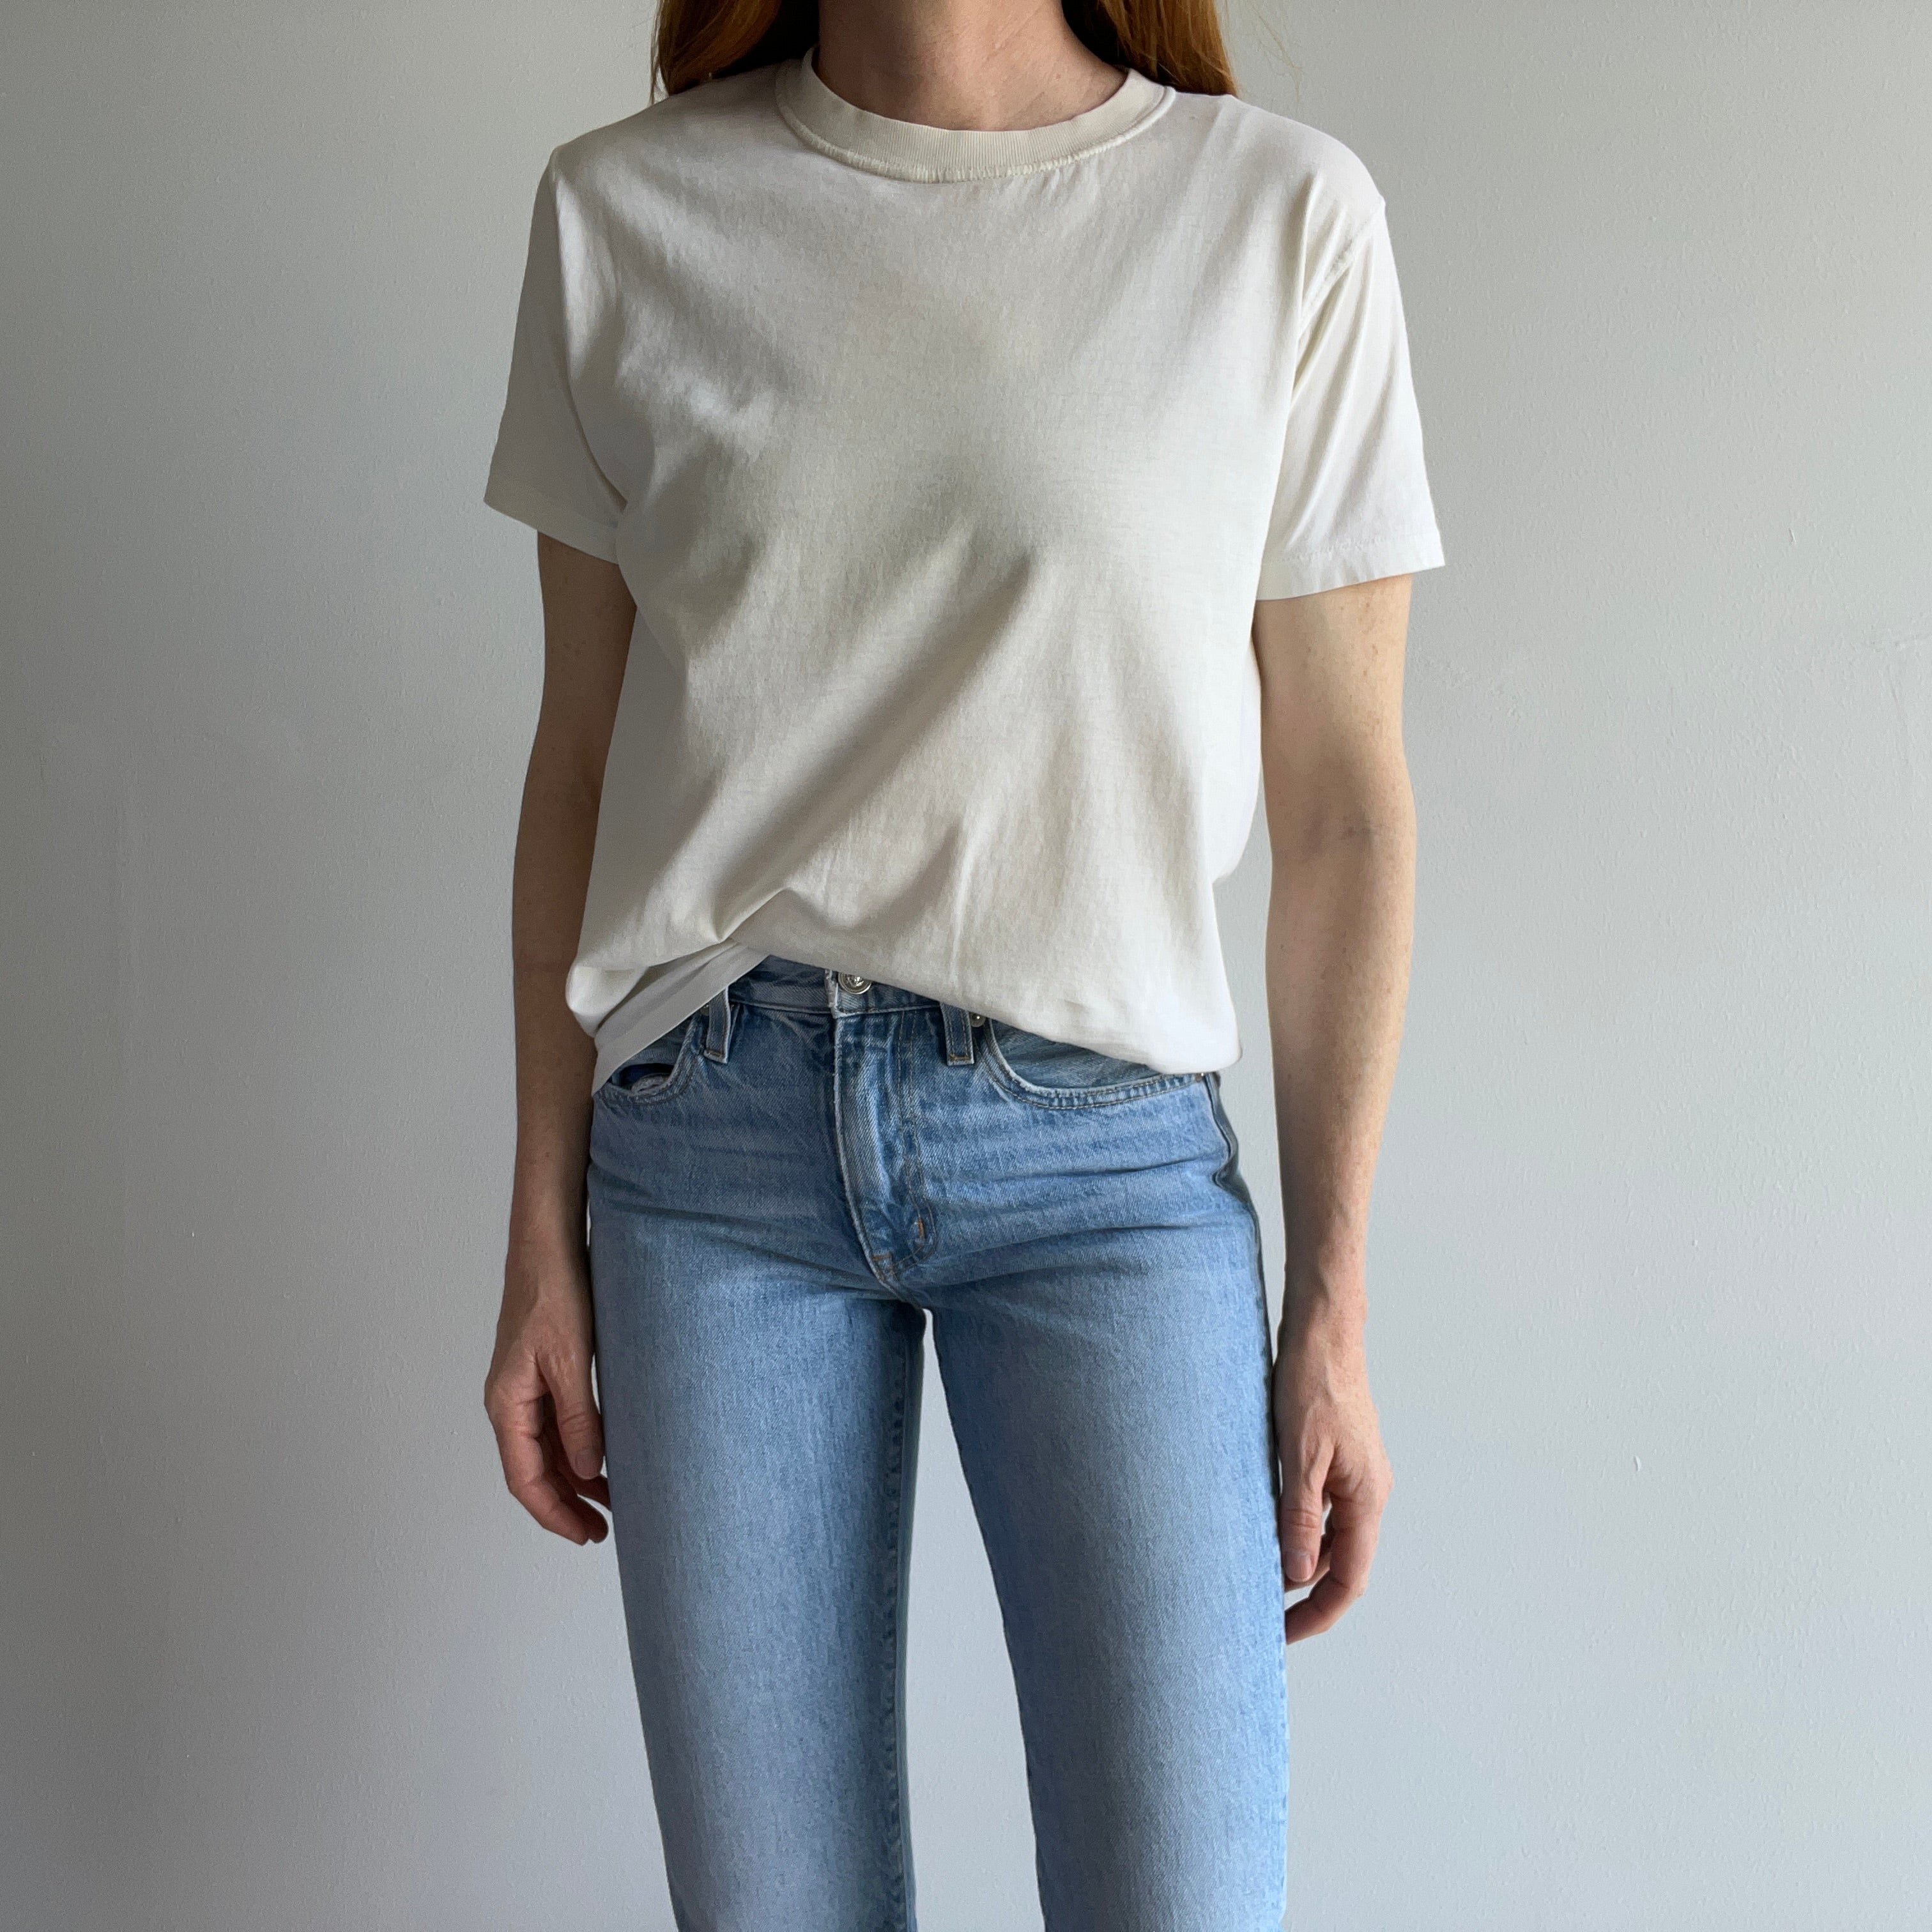 1990s Ecru From Age Staining Super Soft Calvin Klein Blank Off White T-Shirt